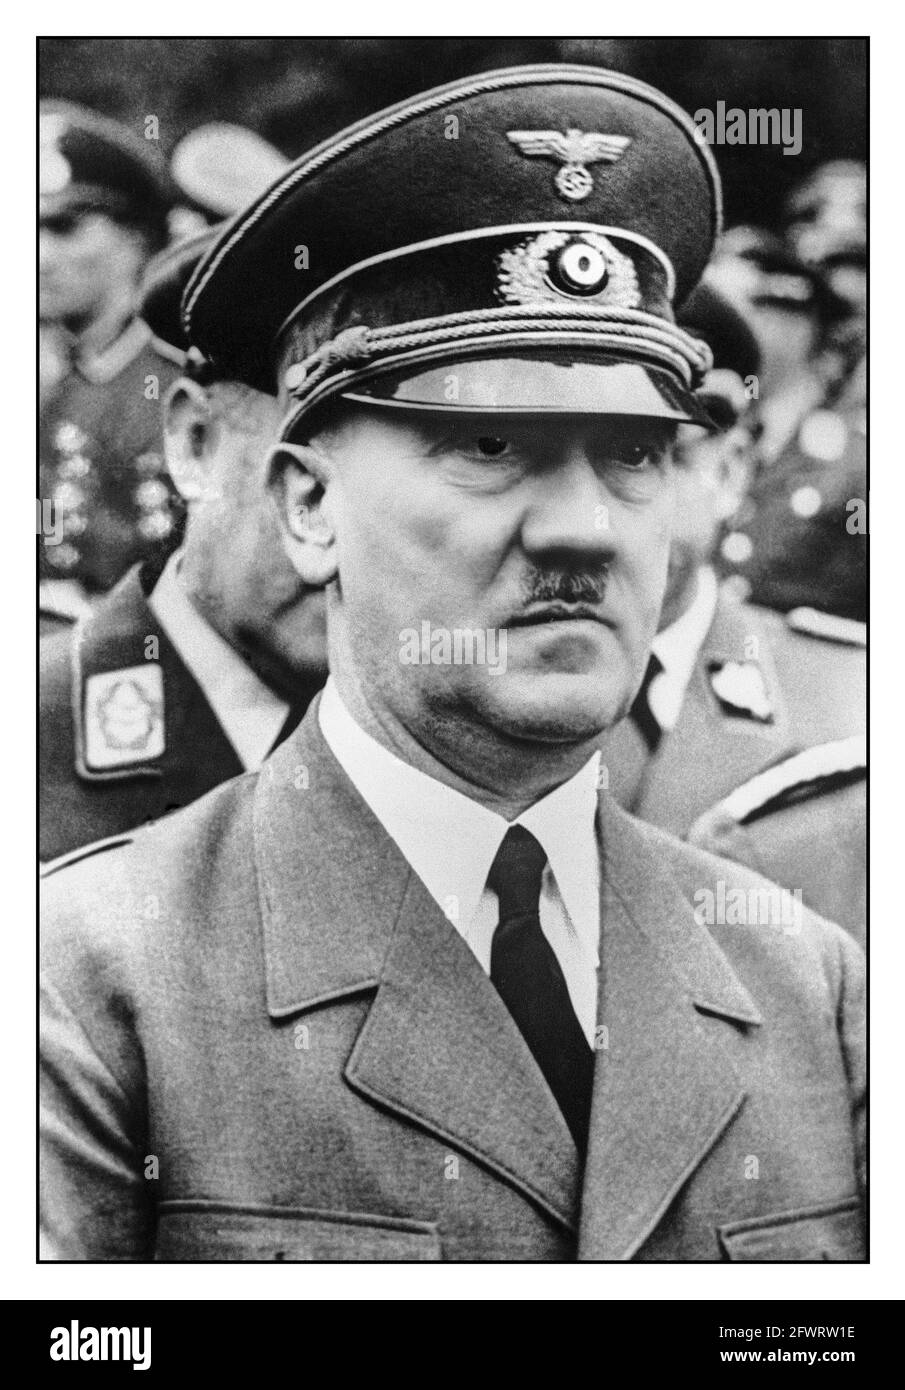 Adolf Hitler WW2 1940's exterior face view in uniform at a military gathering in Nazi Germany Adolf Hitler born: April 20th, 1889 in Braunau am Inn, died: by suicide on April 30th, 1945 in Berlin; in 1920 he took over the leadership of the NSDAP, on January 30, 1933 he became Chancellor and established the fascist dictatorship; on August 2nd, 1934 he made himself head of state and became commander in chief of the armed forces. Adolf Hitler German Führer, (“Leader”), title used by Adolf Hitler to define his role of absolute authority in Germany’s Third Reich (1933–45). Stock Photo